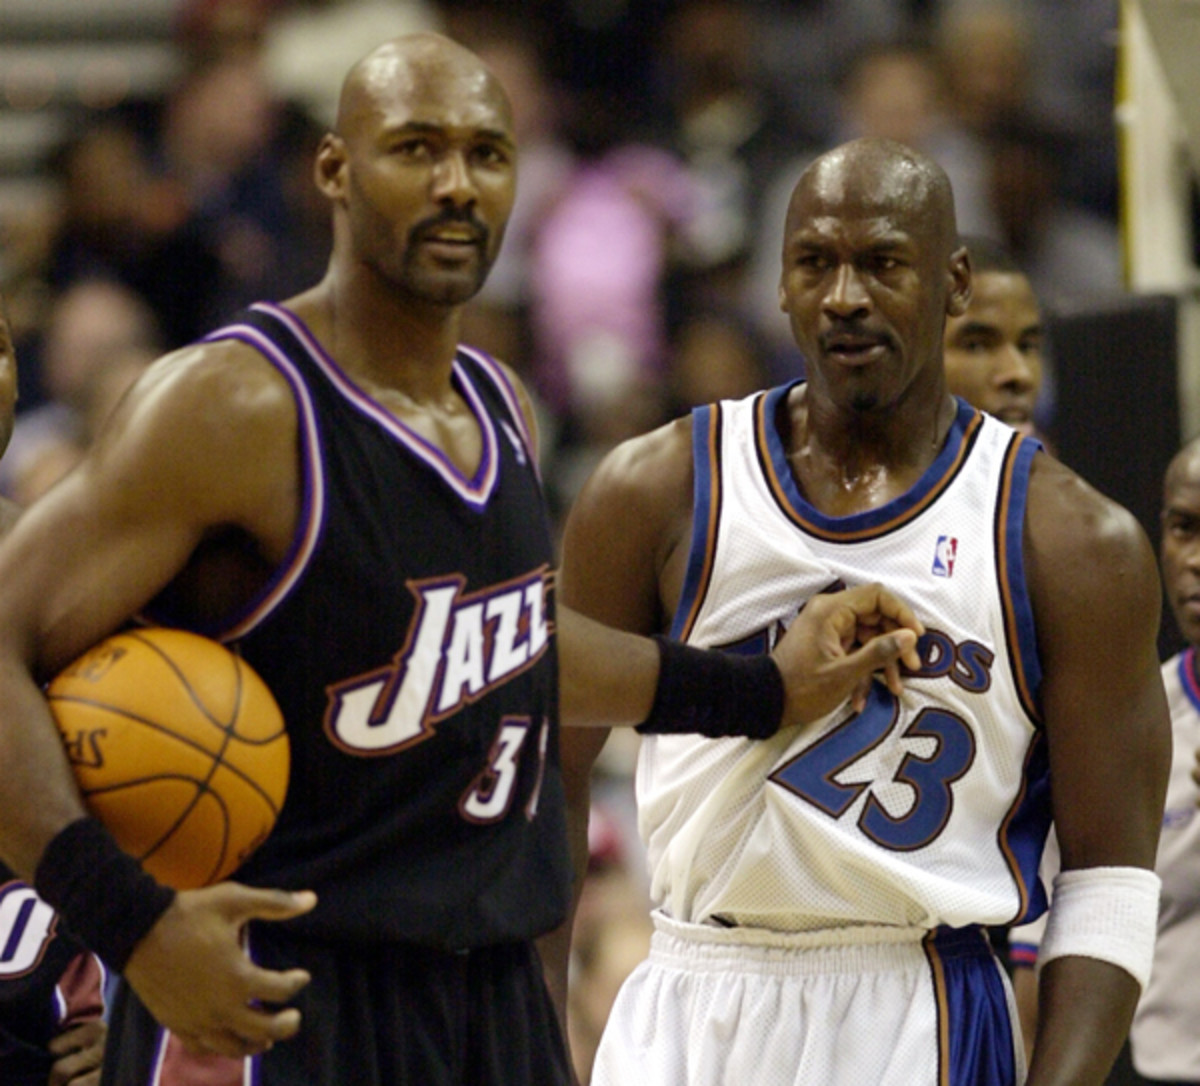 Longtime rivals Michael Jordan and Karl Malone exchange pleasantries before a 2002 Jazz-Wizards game. (AP Photo/Nick Wass)